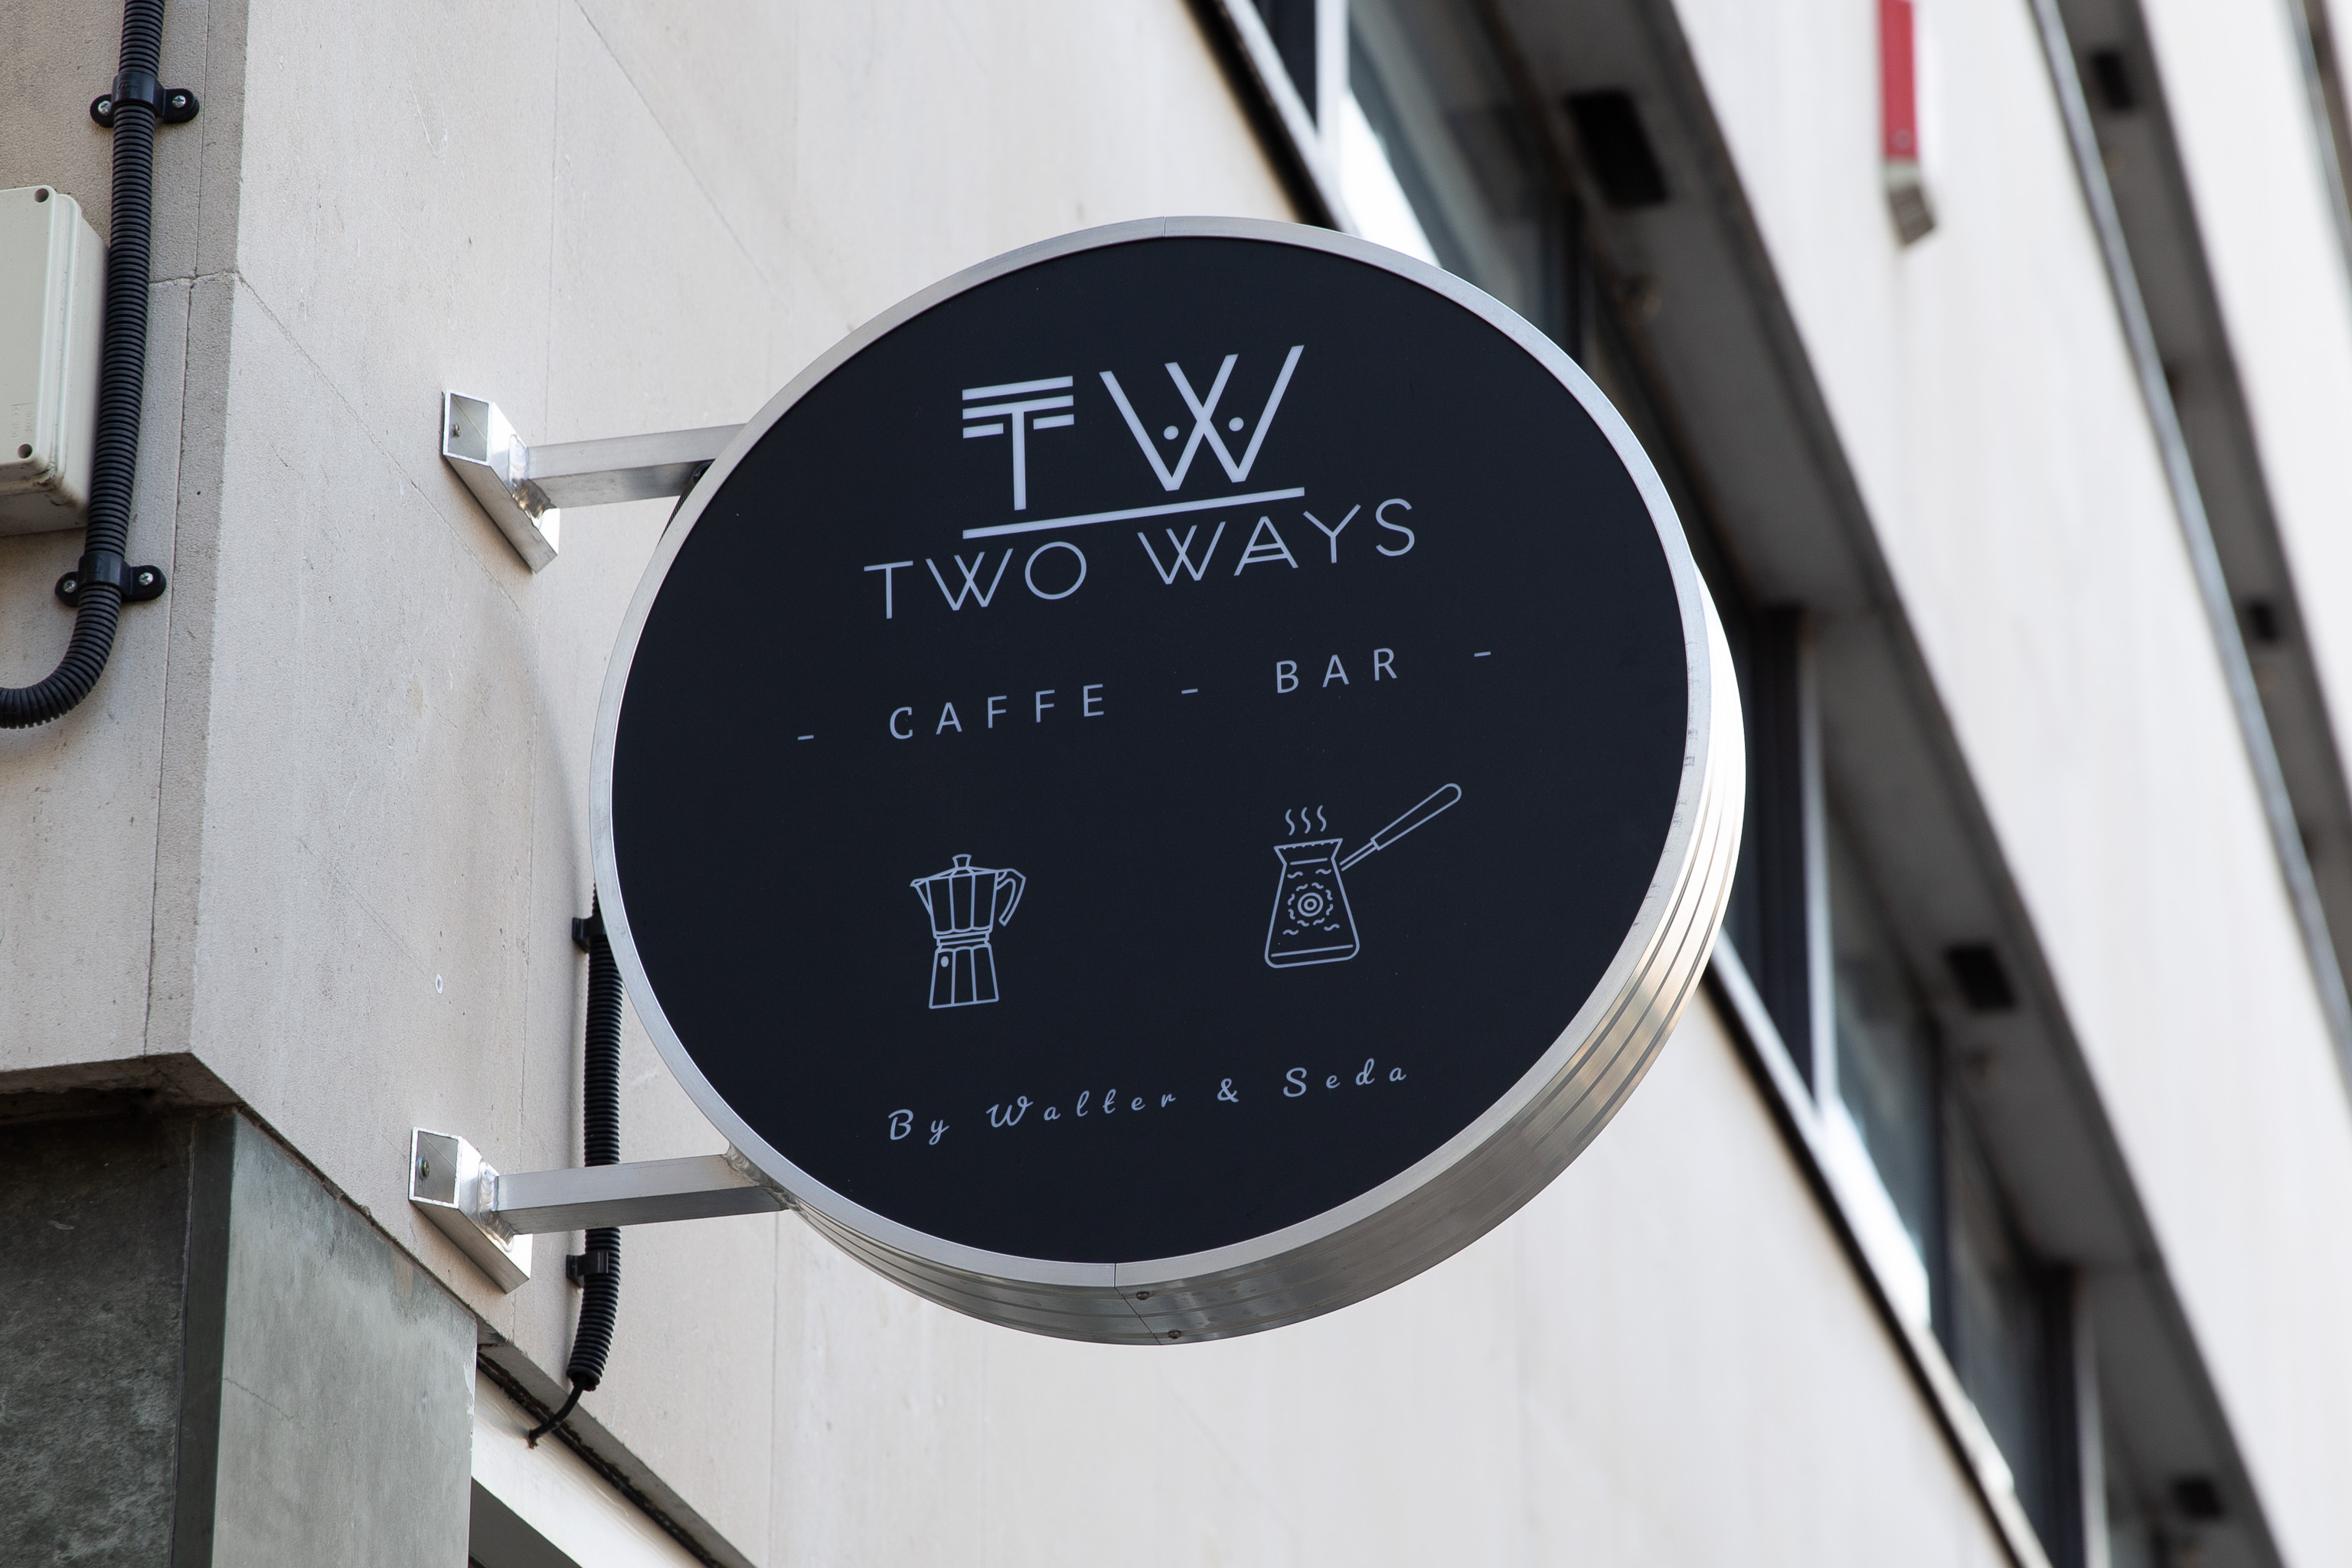 Two Ways Caffe Bar
I understand that the two people who run the cafe are Italian and Turkish. I have tried coffee each of these ways many times, and I commend them bo...